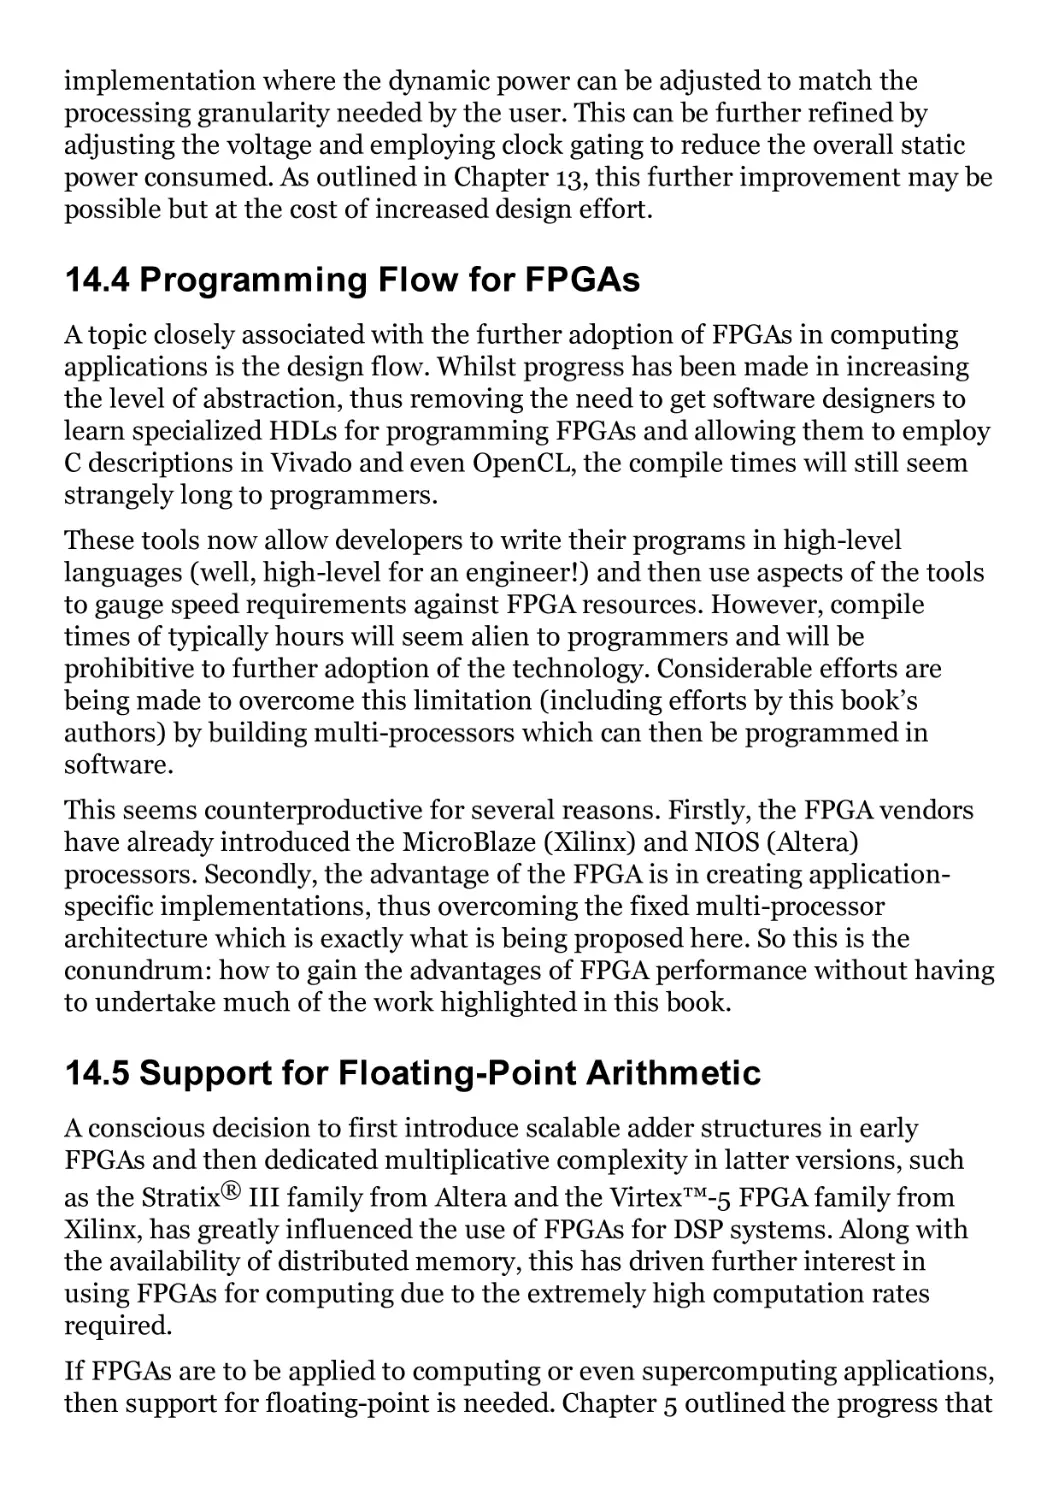 14.4 Programming Flow for FPGAs
14.5 Support for Floating-Point Arithmetic